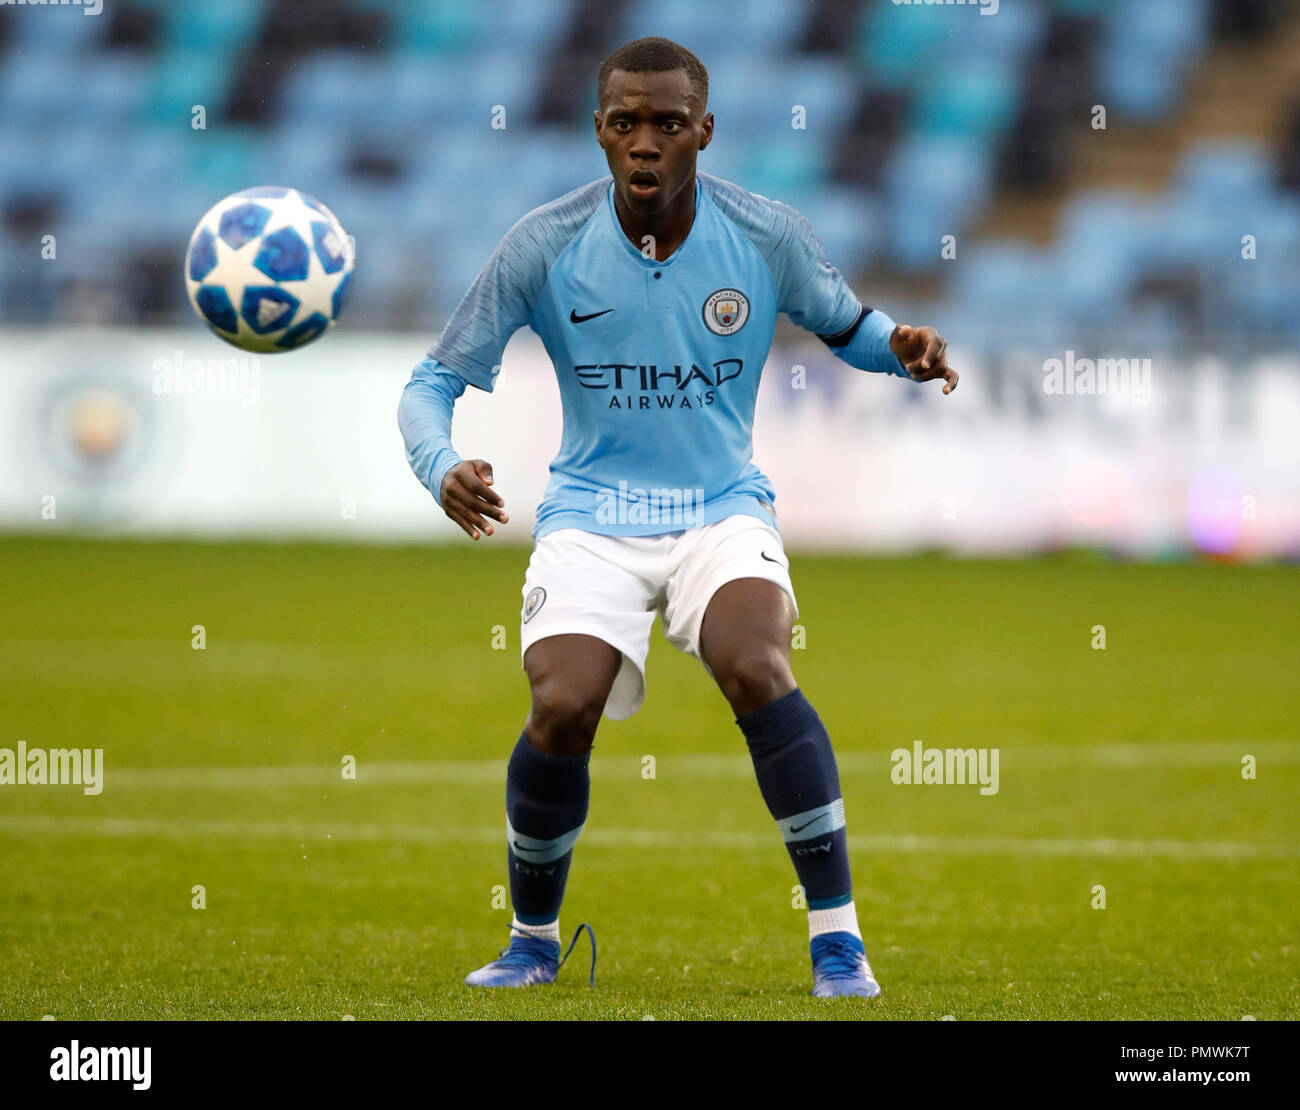 Manchester City's Claudio Gomes during the UEFA Youth League, Group F match  at the City Football Academy, Manchester. PRESS ASSOCIATION Photo. Picture  date: Wednesday September 19, 2018. See PA story SOCCER Man